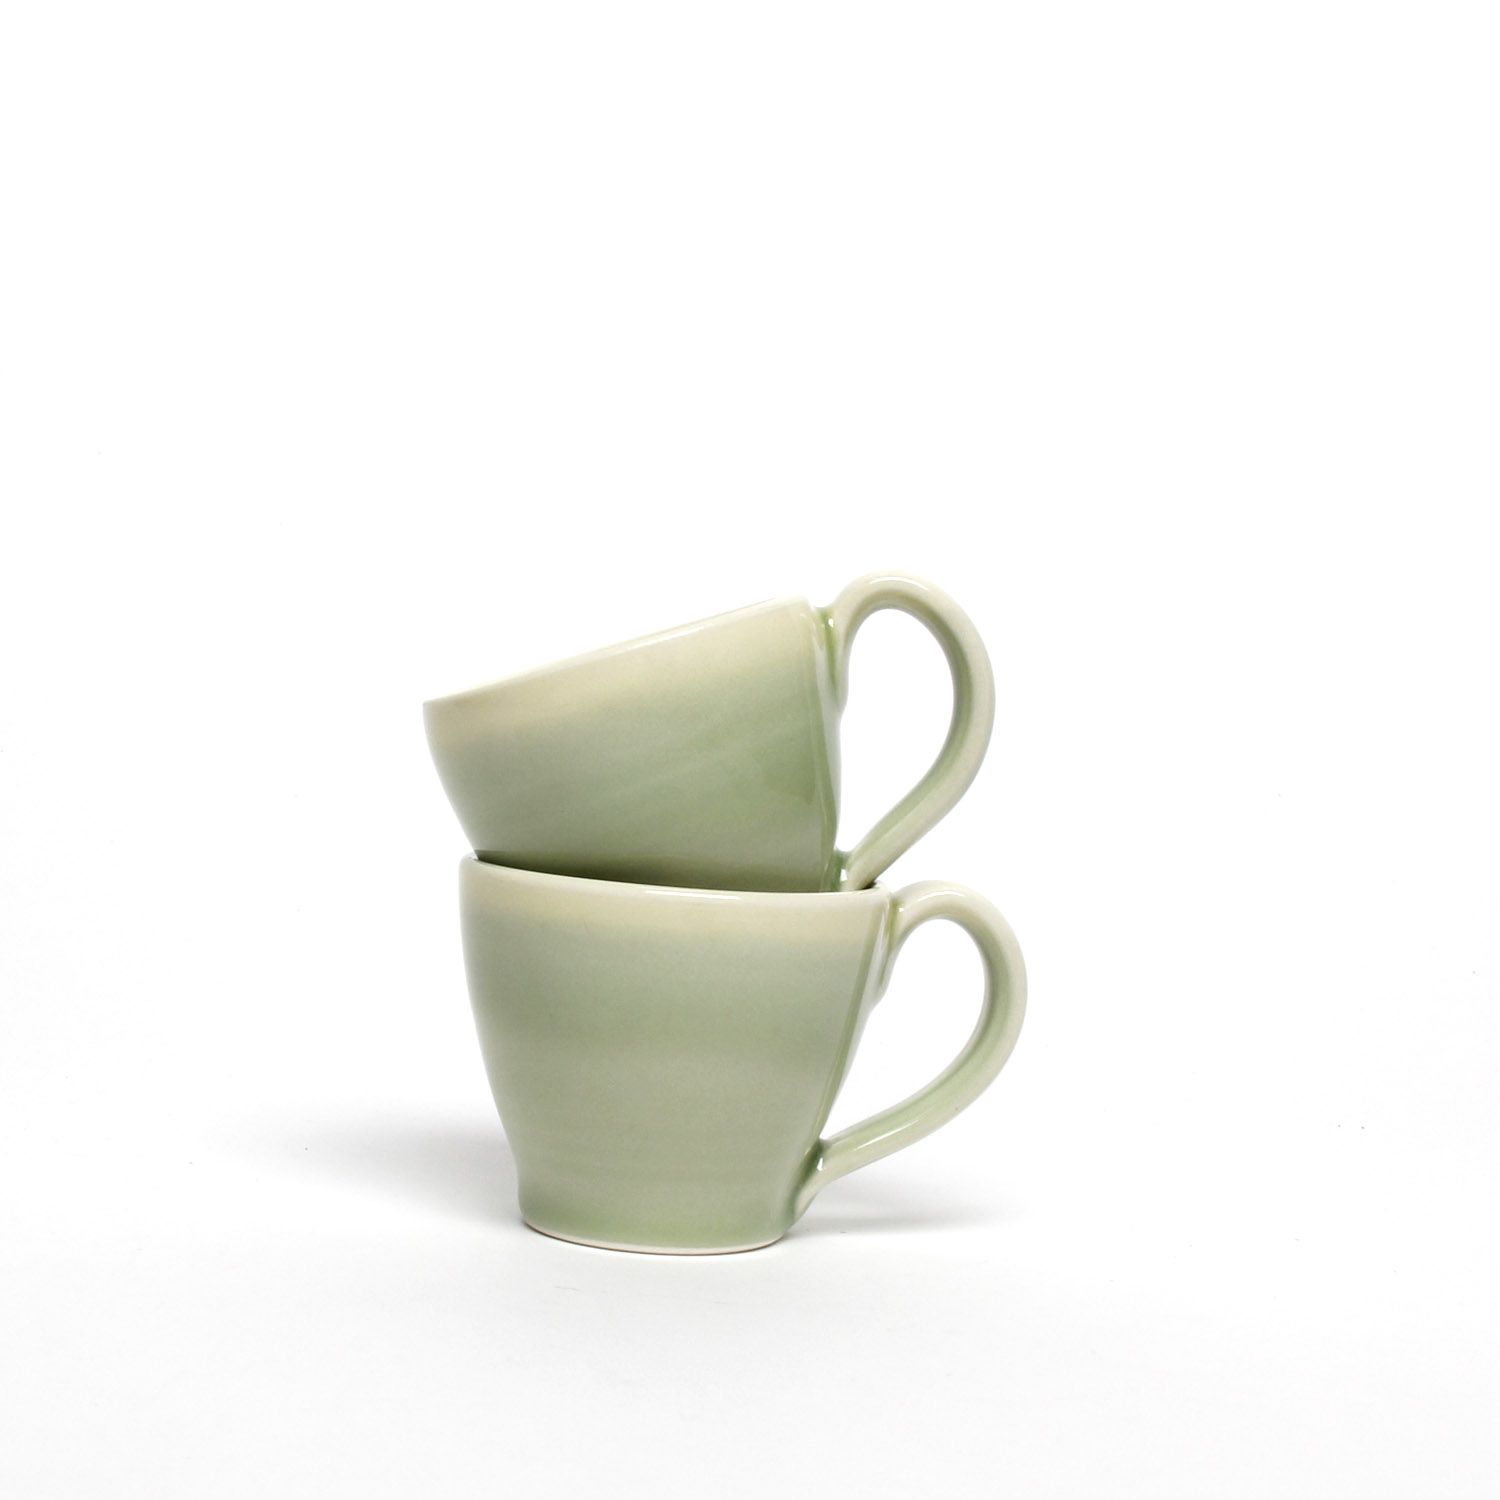 Thomas Aitken: Green Espresso Cup Product Image 4 of 5